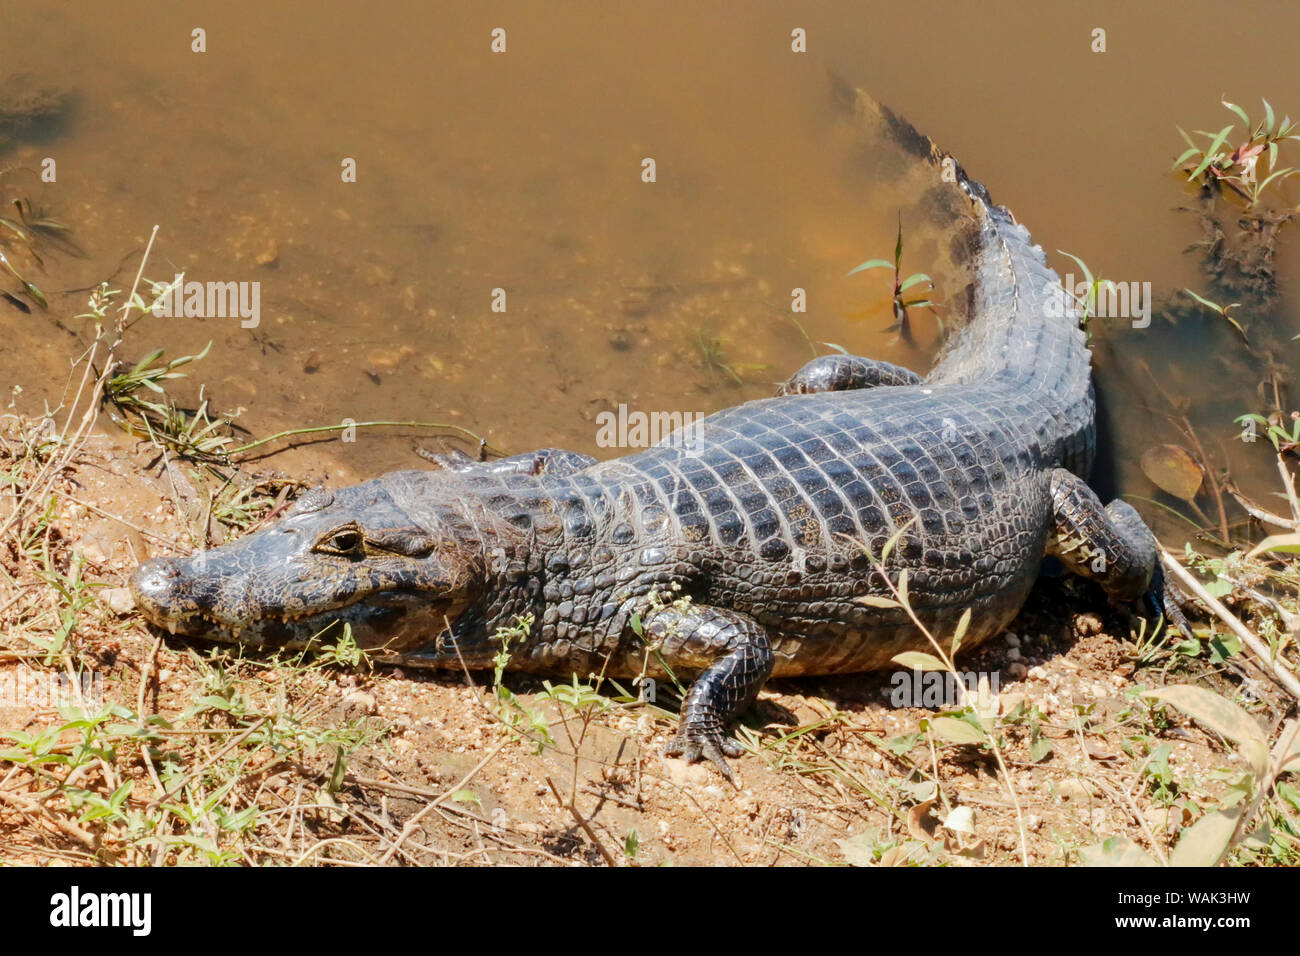 Pantanal, Mato Grosso, Brazil. Yacare caimans inhabit Central and South America. They are relatively small sized crocodilians, but still reach lengths of 2-3 meters. Stock Photo